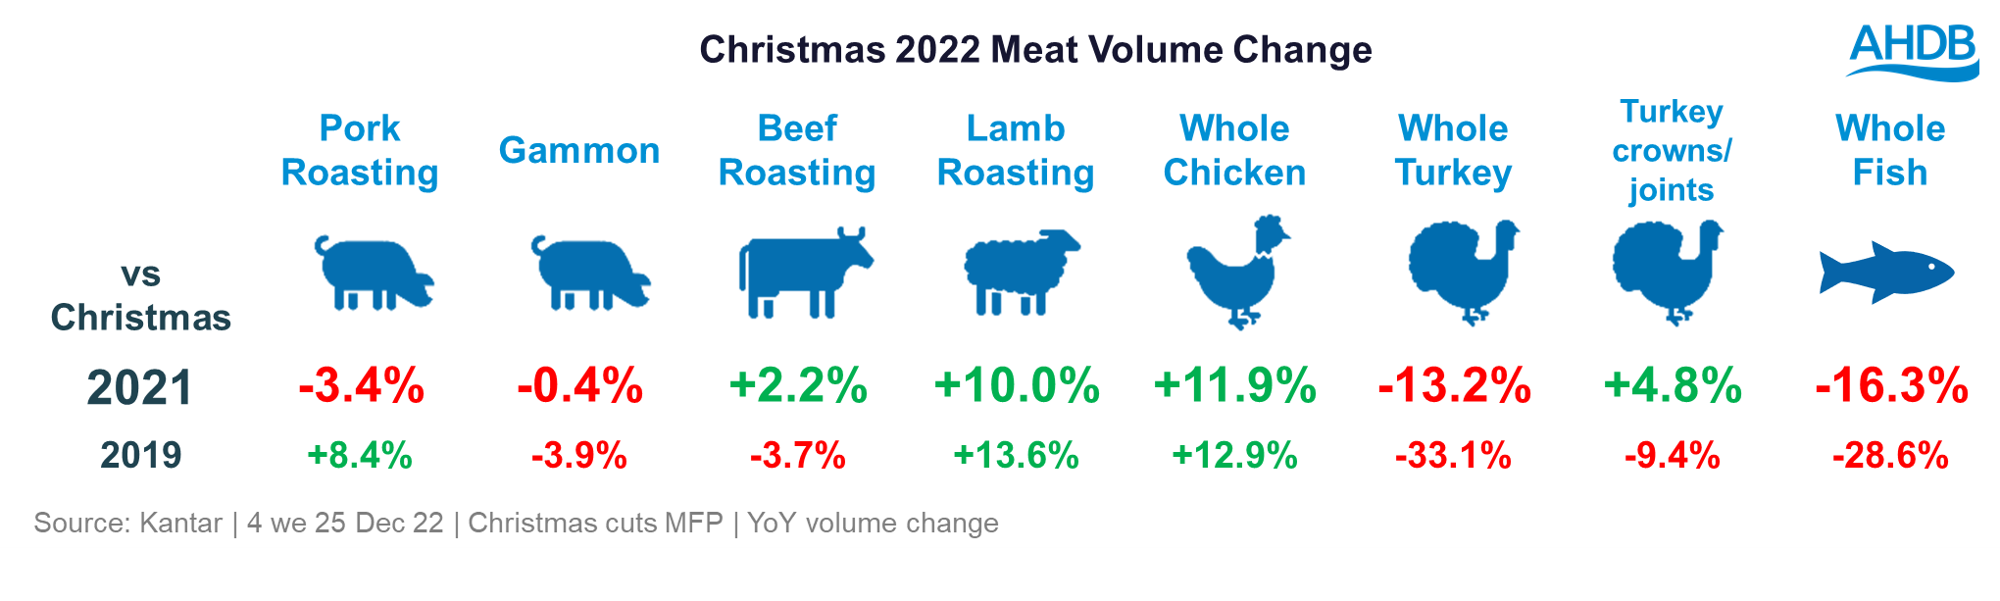 Meat christmas sales performance